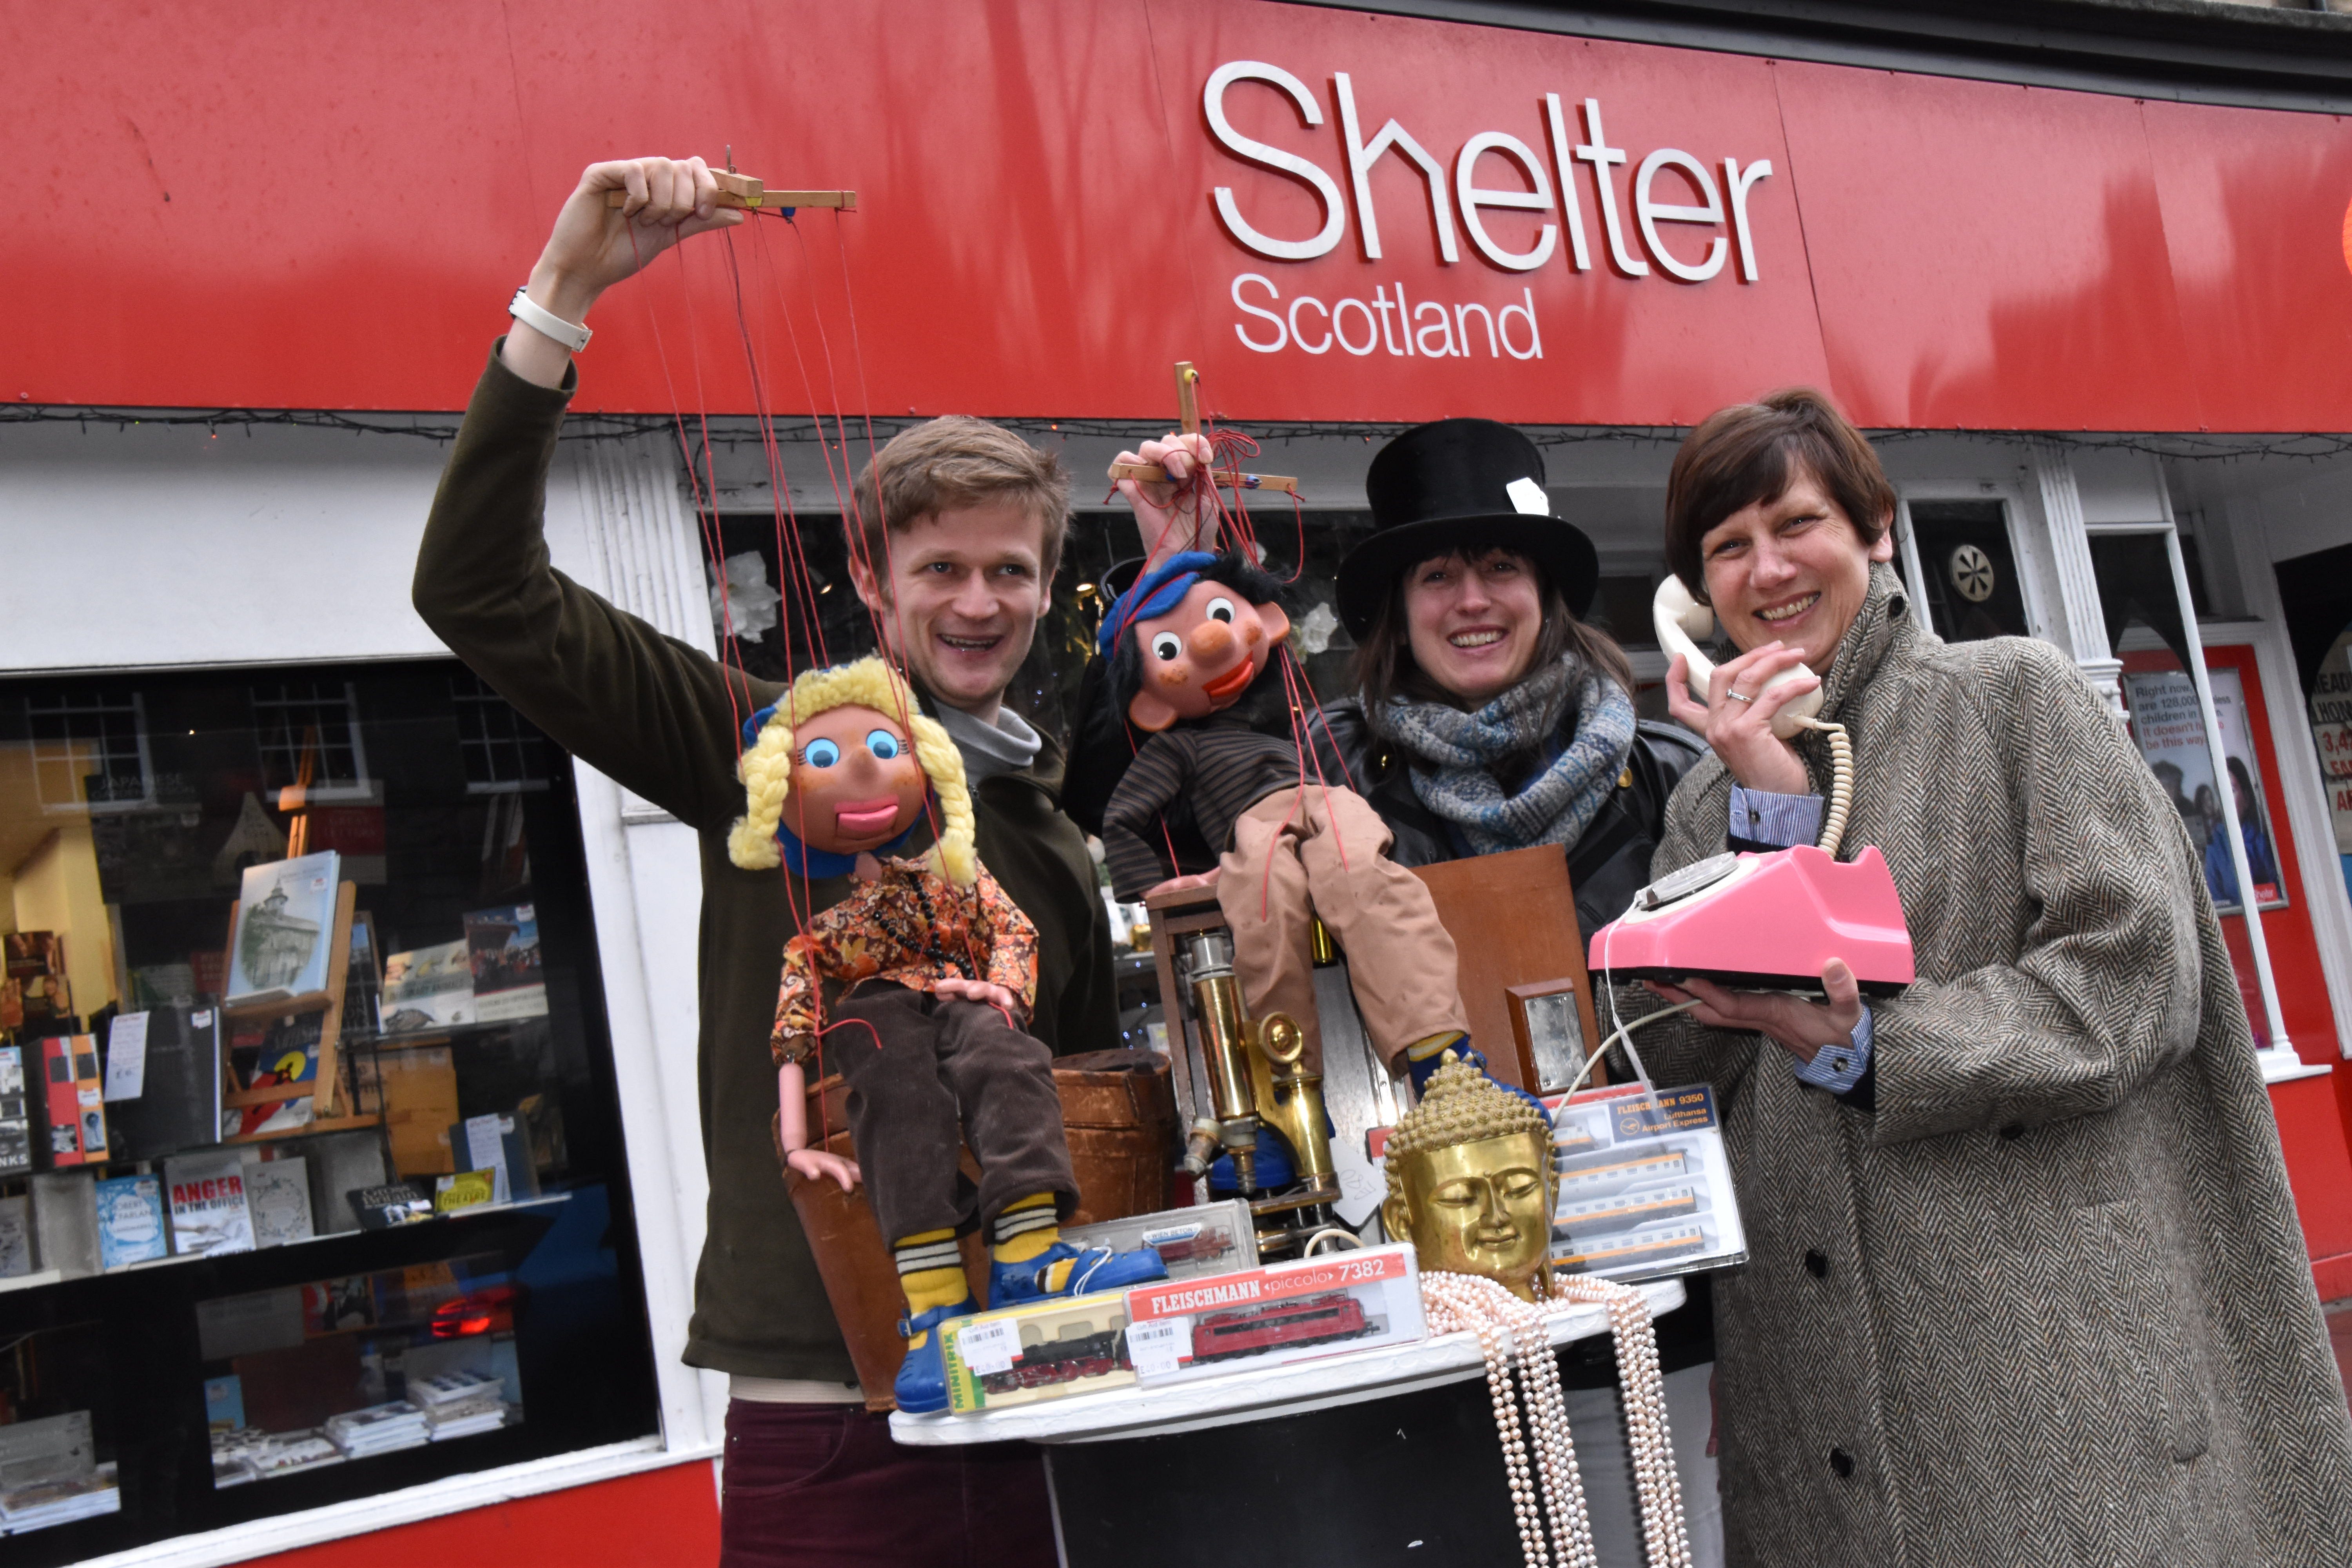 Designer bargains up for grabs at Shelter Scotland’s annual charity shop event